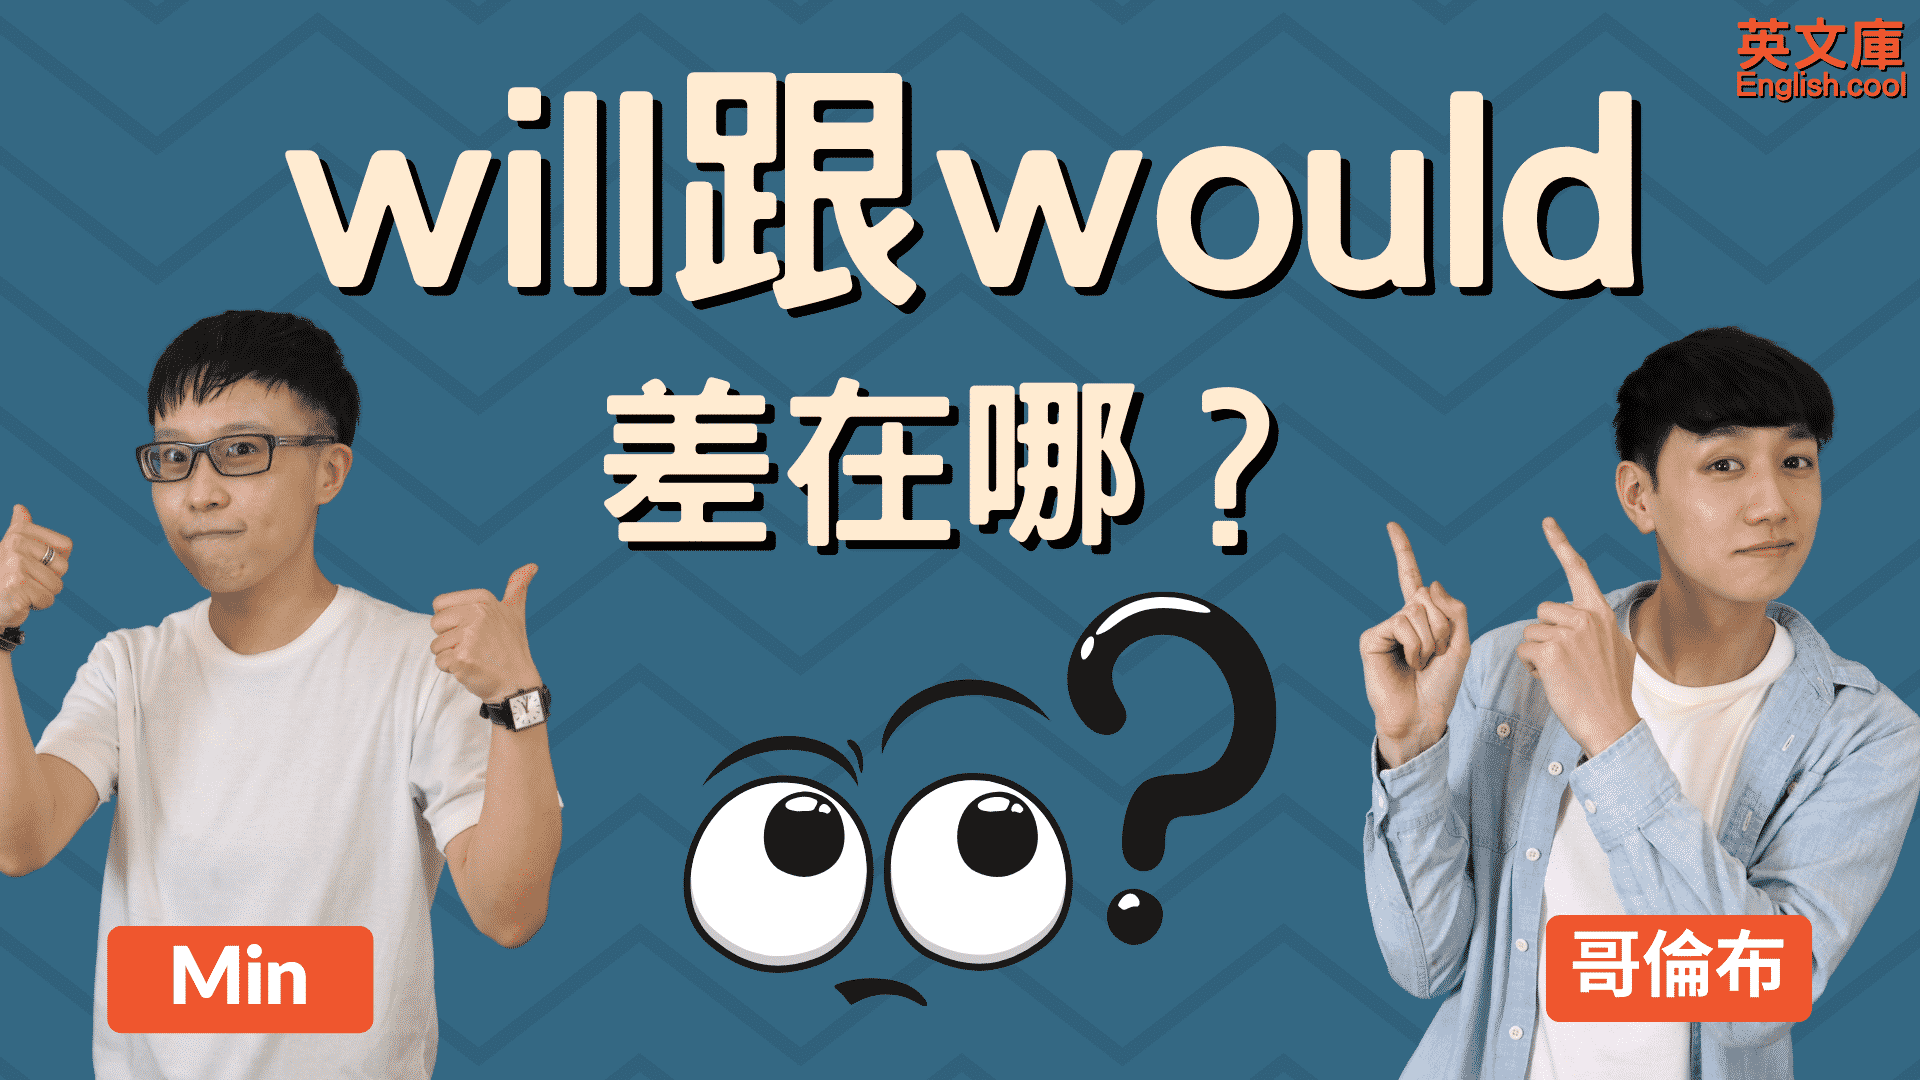 You are currently viewing Will 跟 Would 的意思是？用法差在哪？